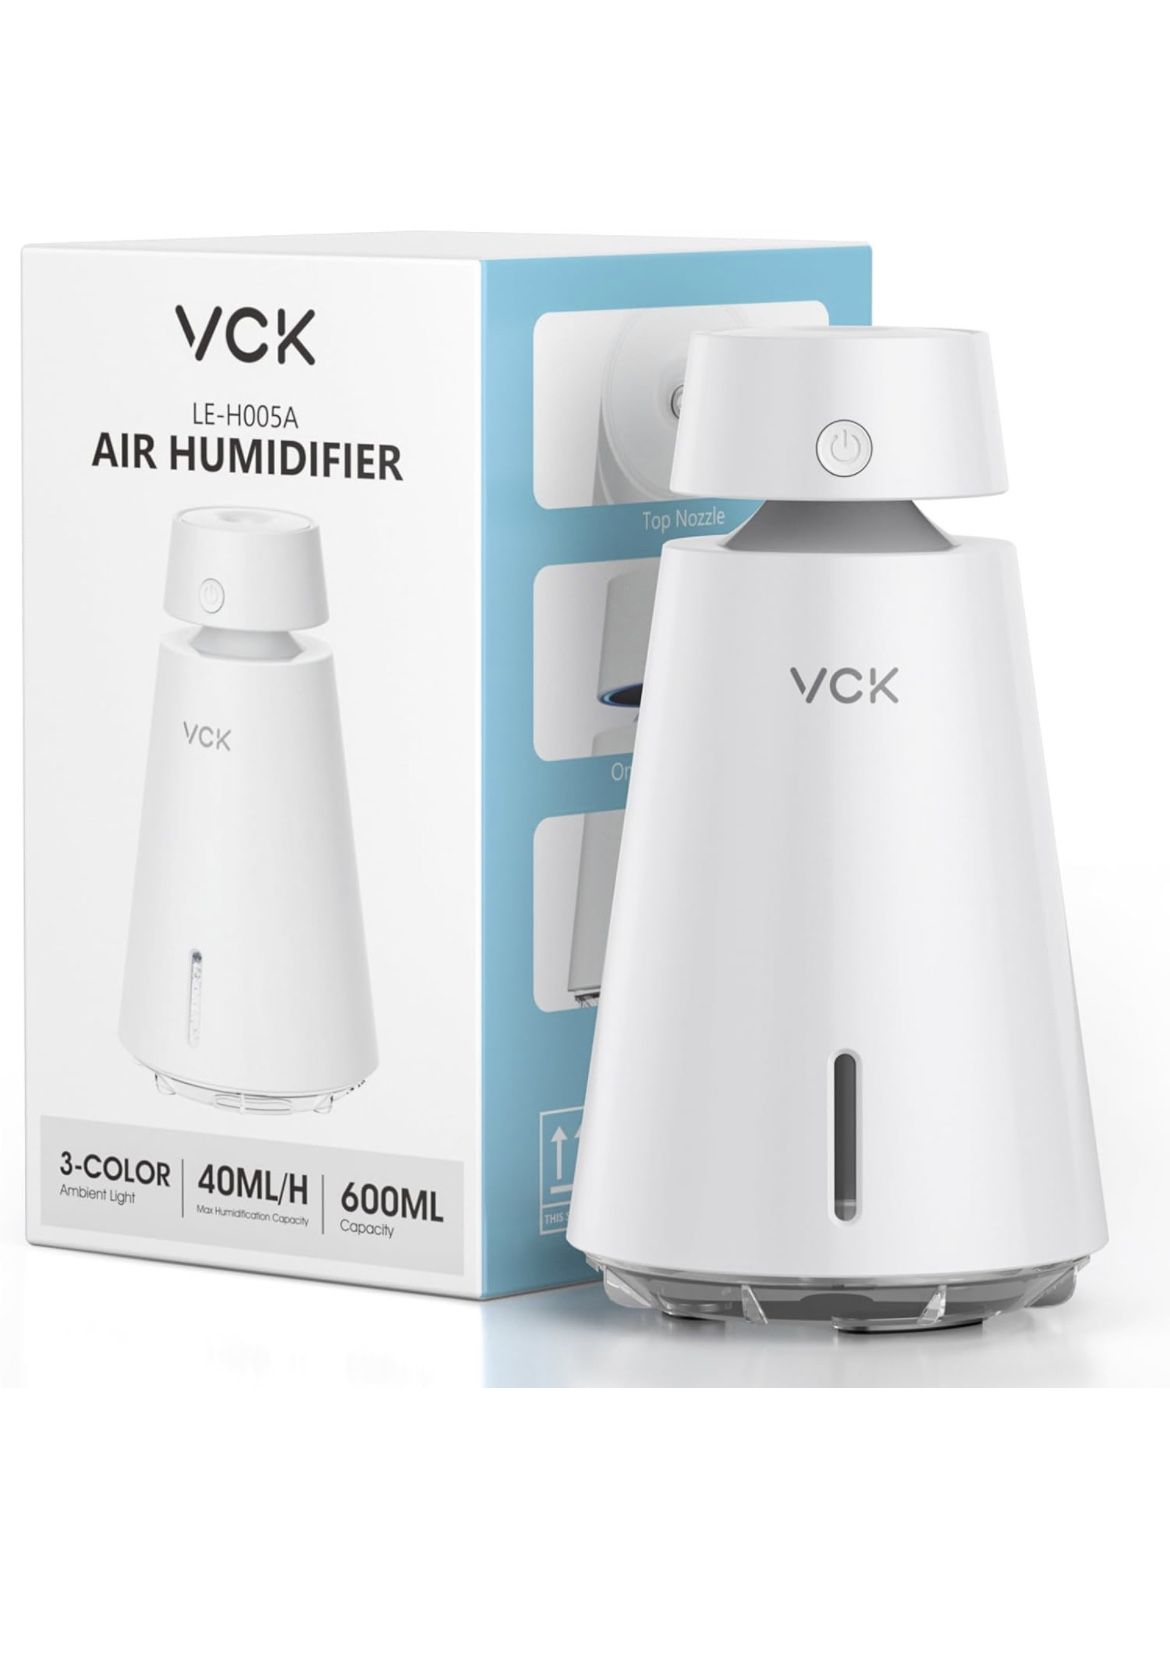 VCK Portable Mini Humidifiers, 600ml Small Cool Mist Humidifier for Bedroom, USB Desktop Humidifier for Plants, Office, Car, Travel, Baby with 2 Mist 